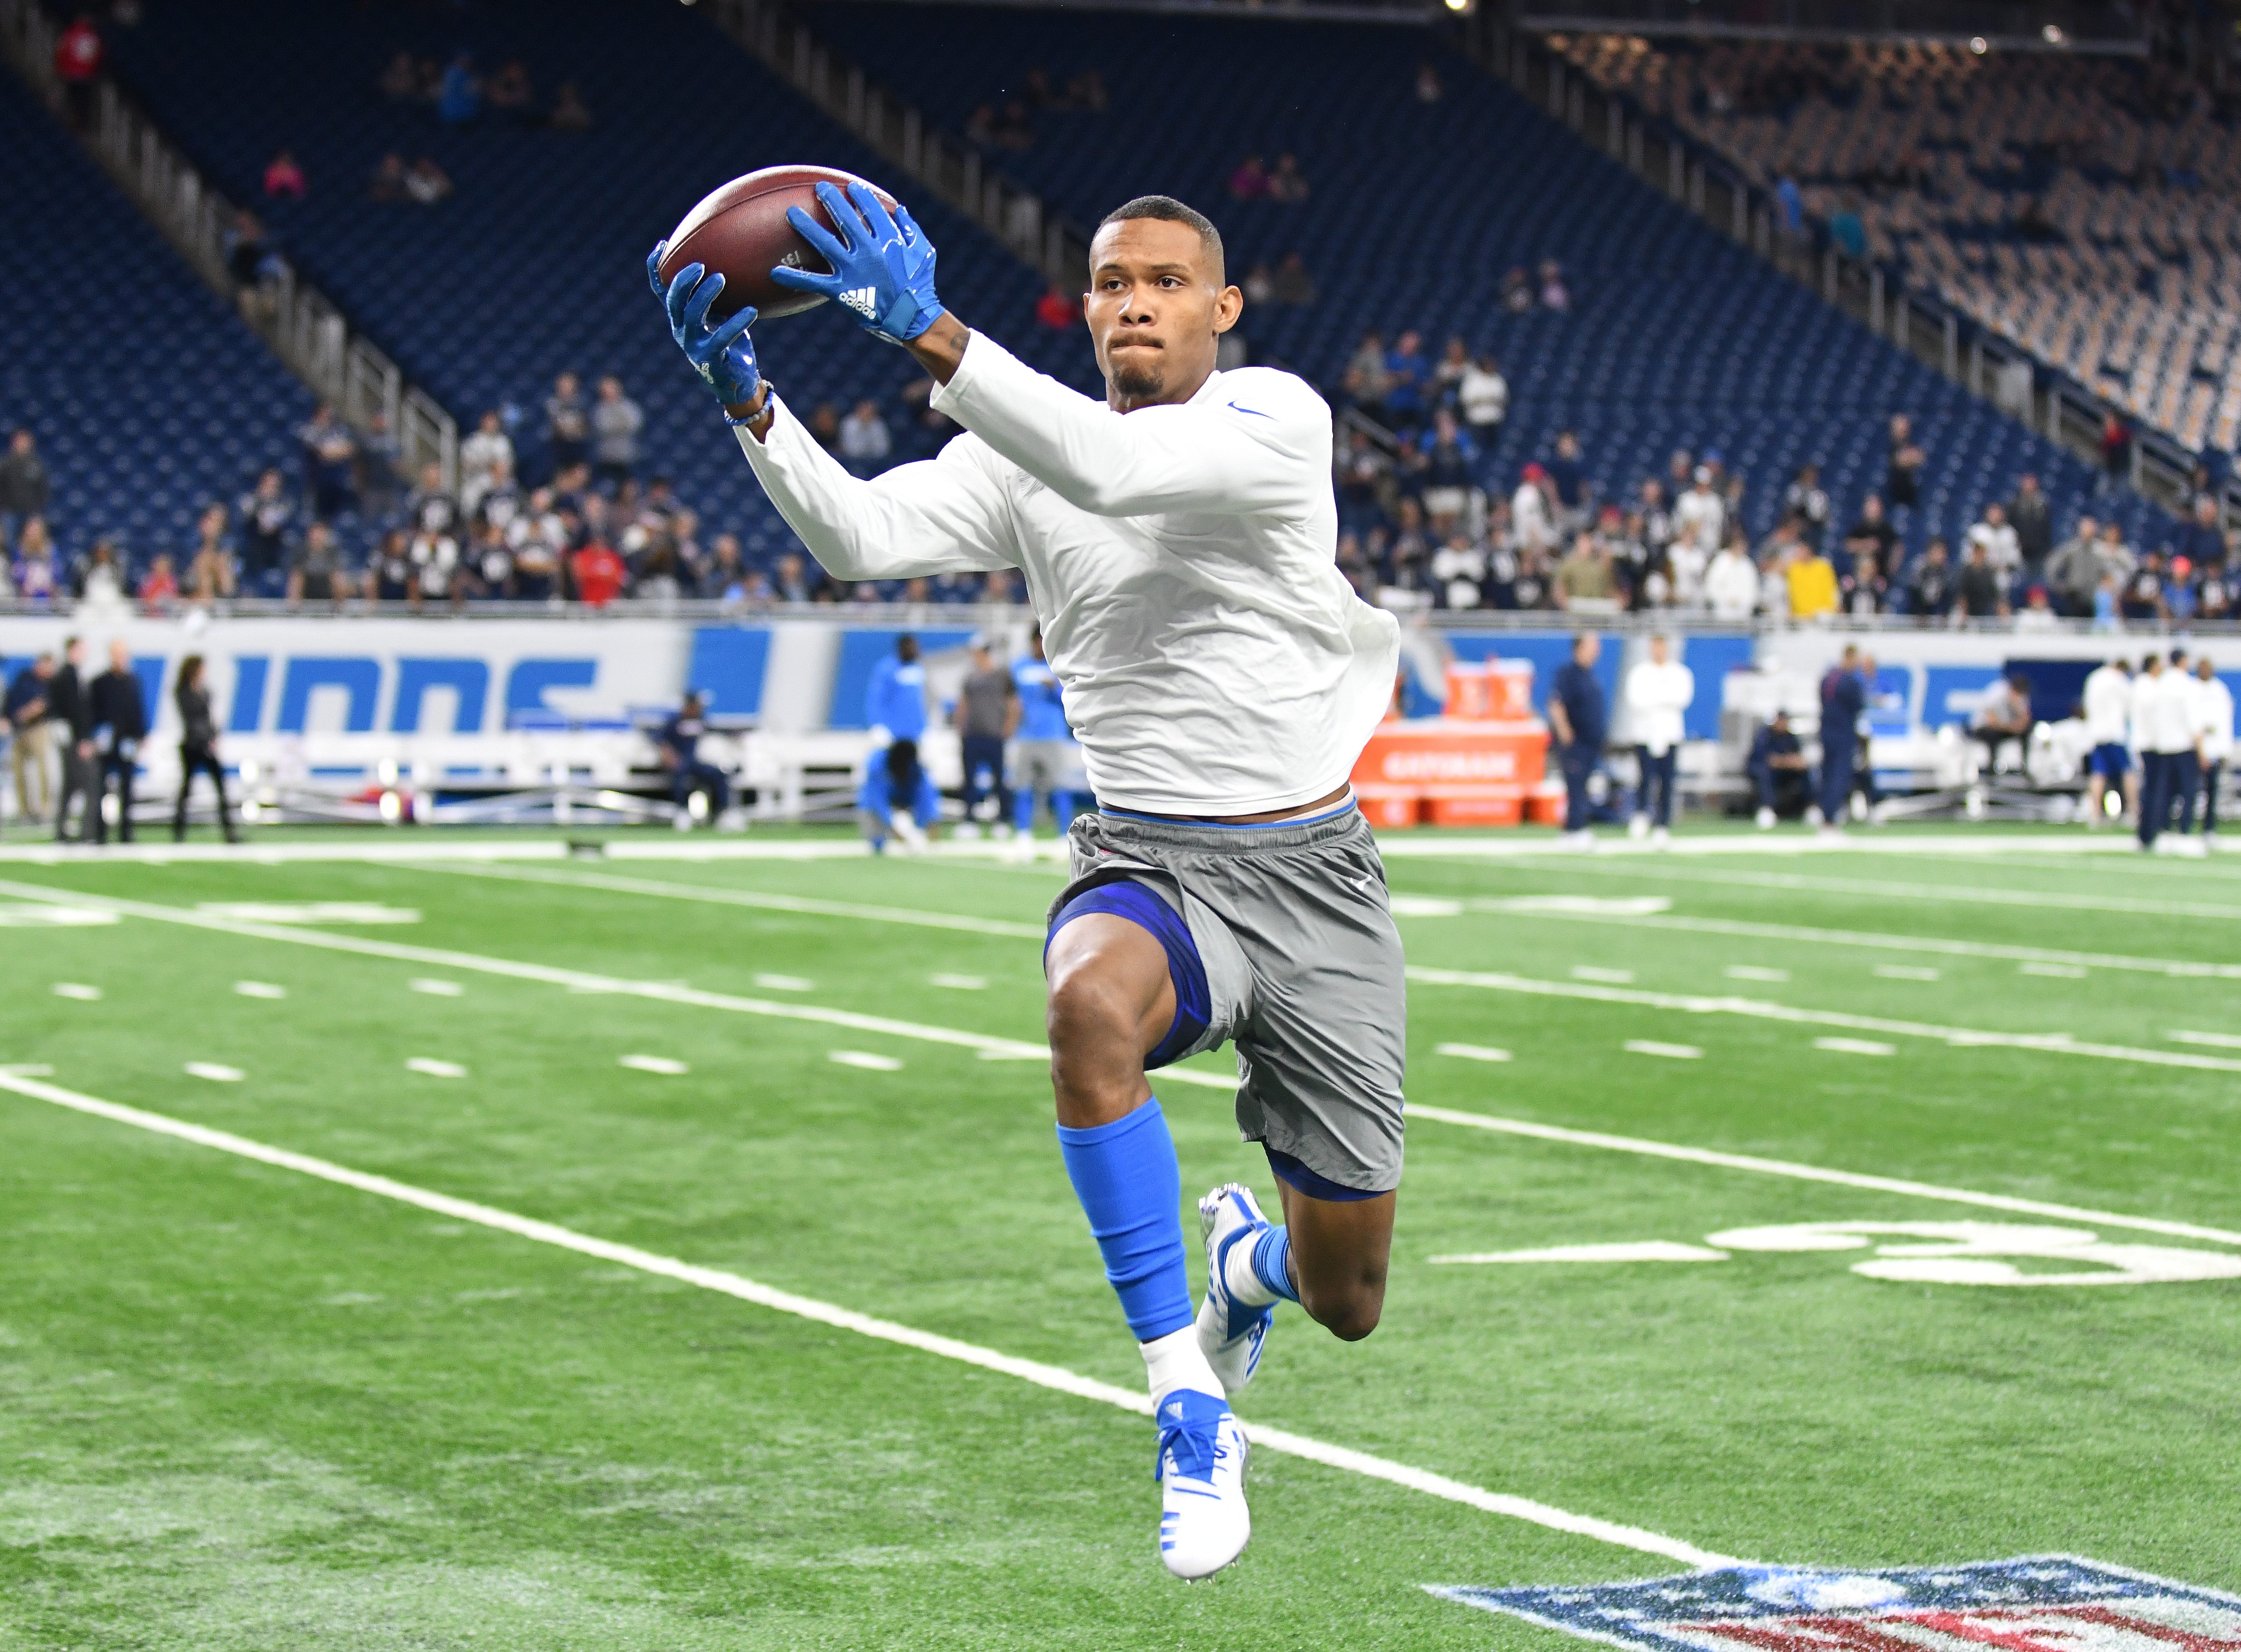 Lions wide receiver Kenny Golladay pulls in a reception during warm-ups prior to playing the New England Patriots at Ford Field in Detroit on September 23, 2018.